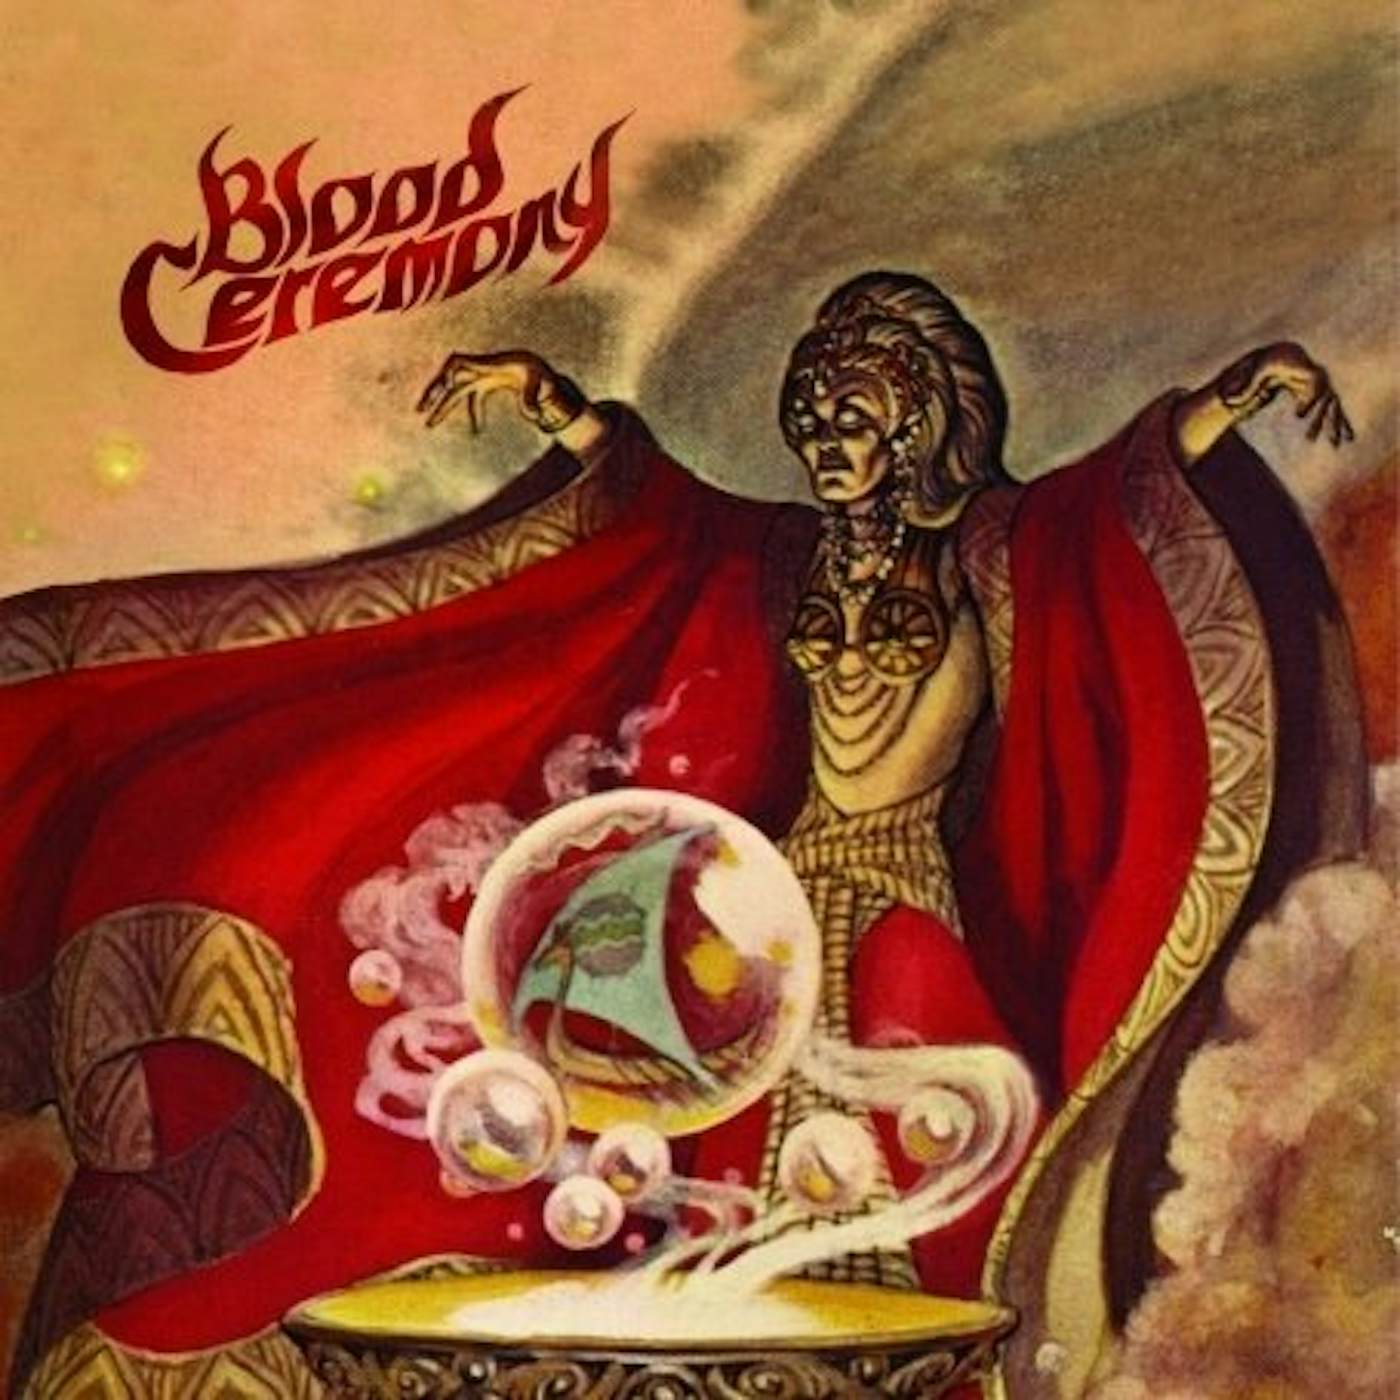 BLOOD CEREMONY Vinyl Record - Holland Release